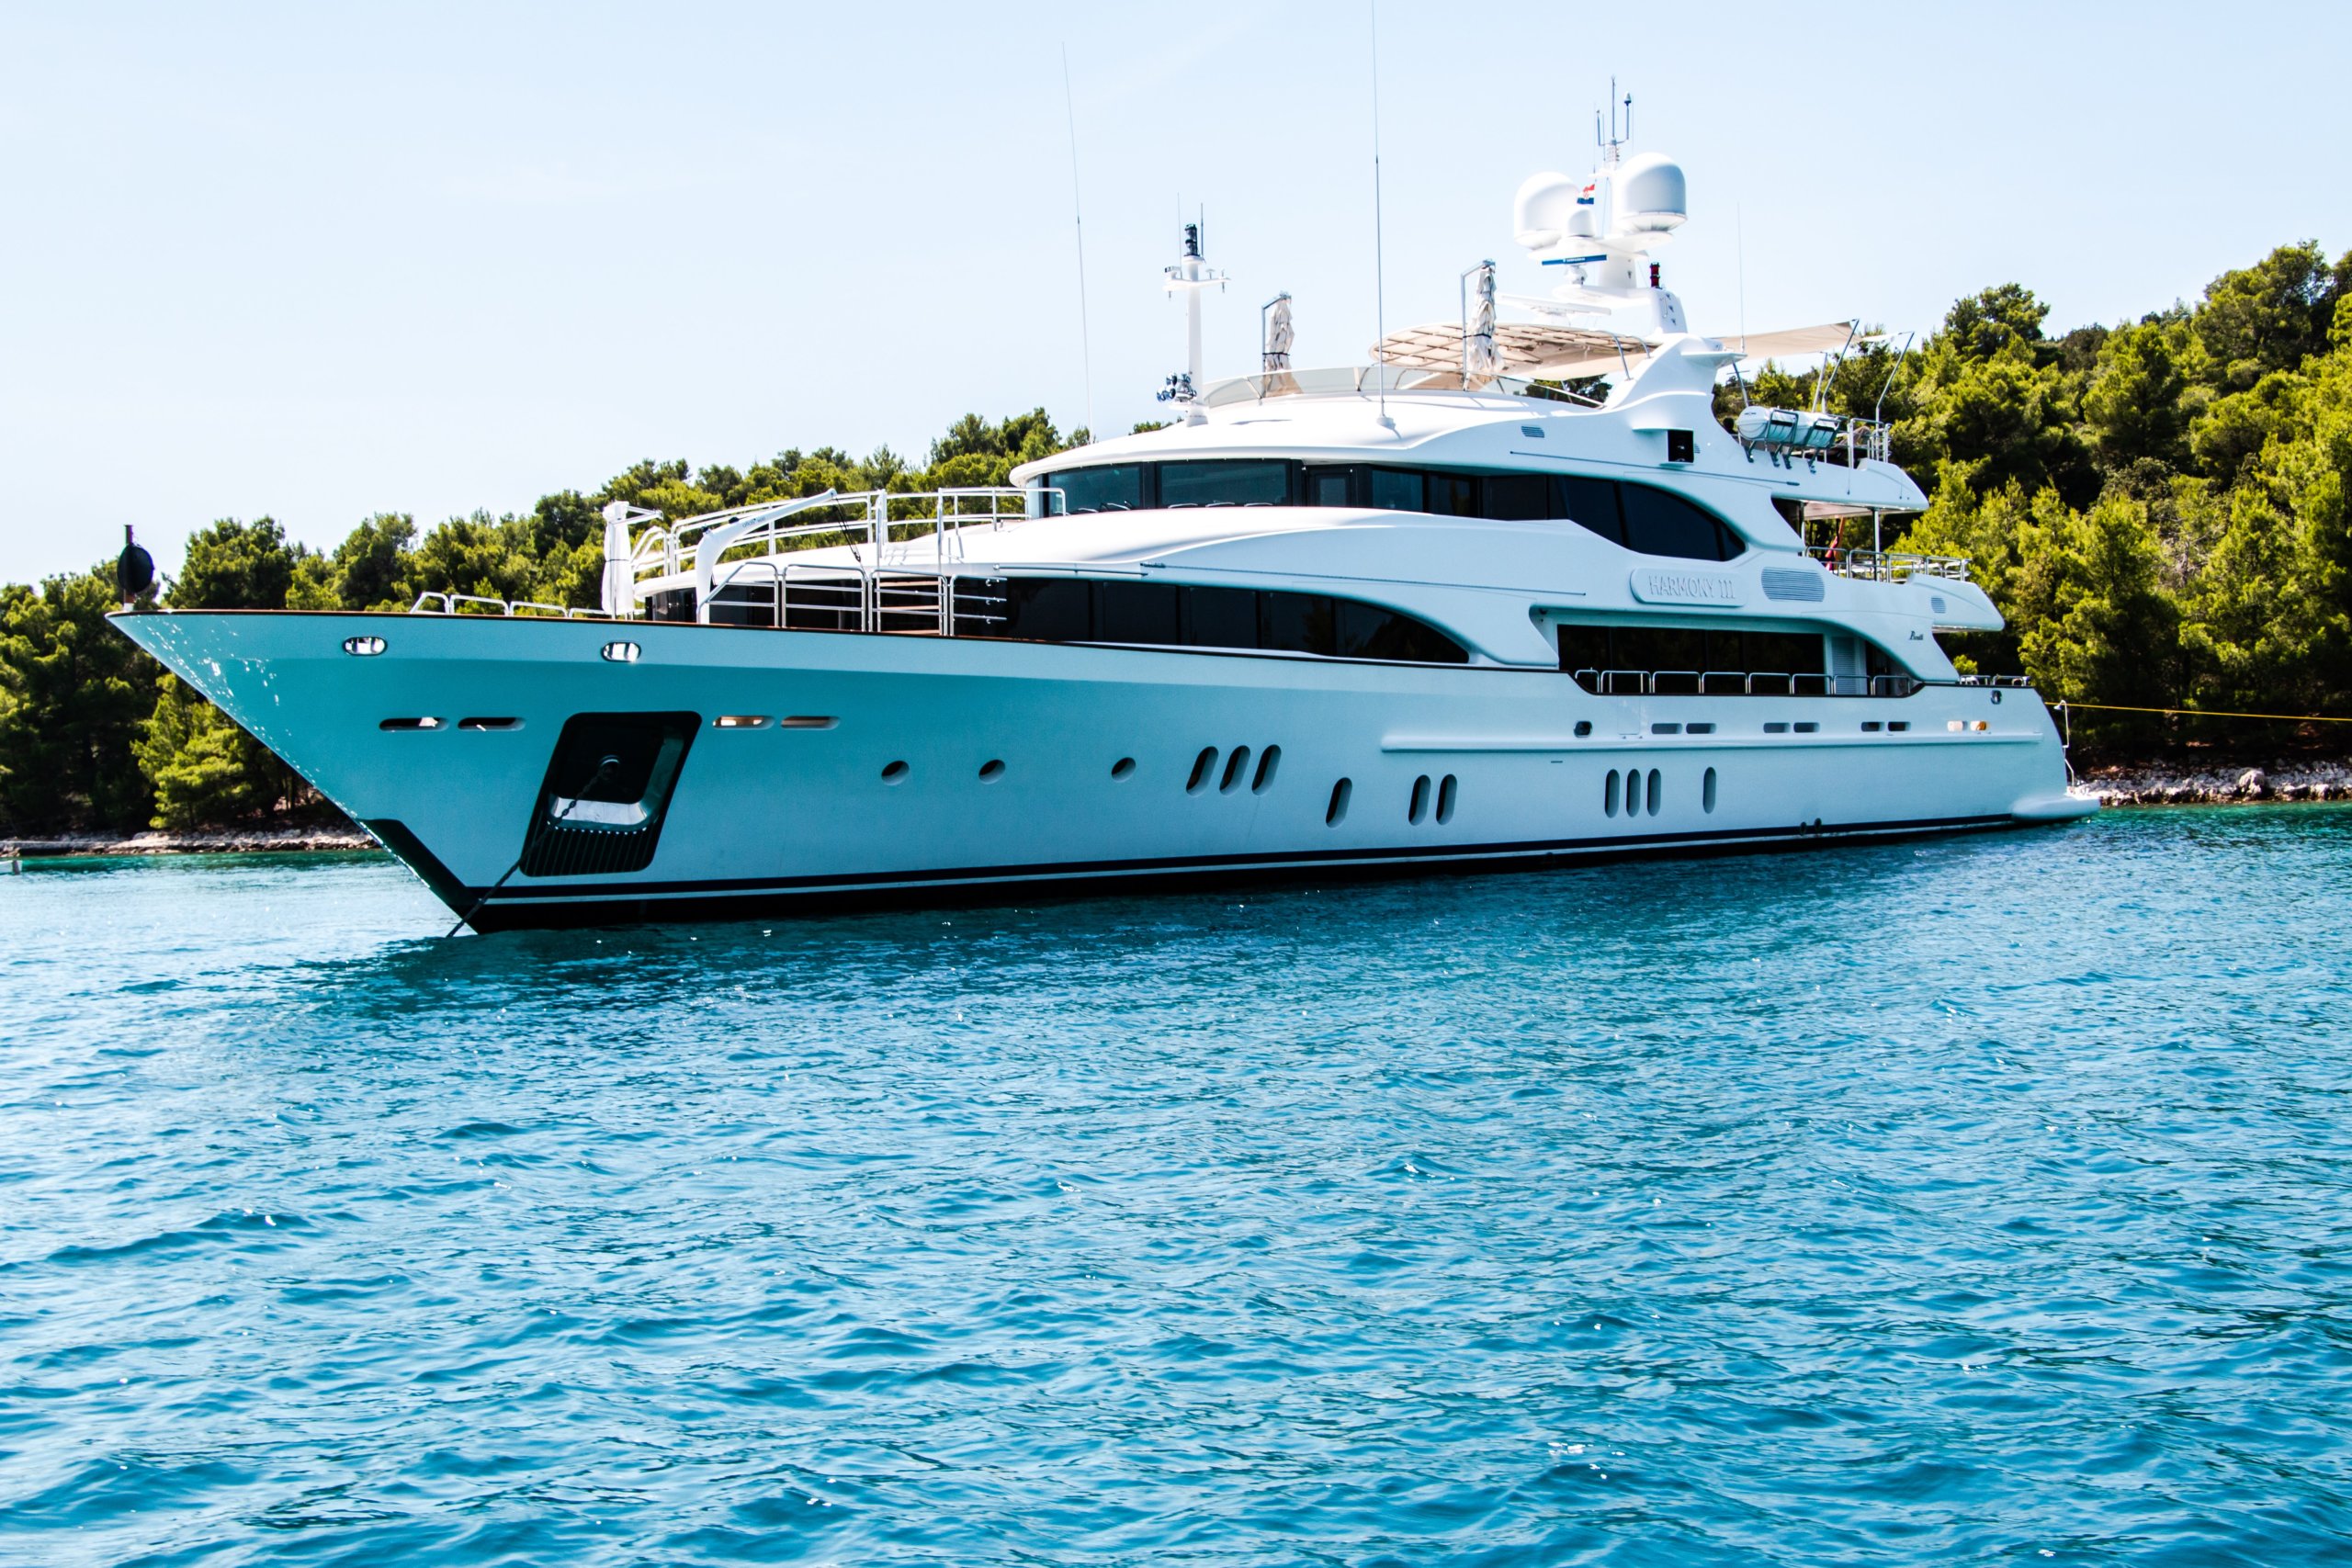 A luxurious Yacht shown on crystal clear water, home to one of Matot's high-quality dumbwaiters.